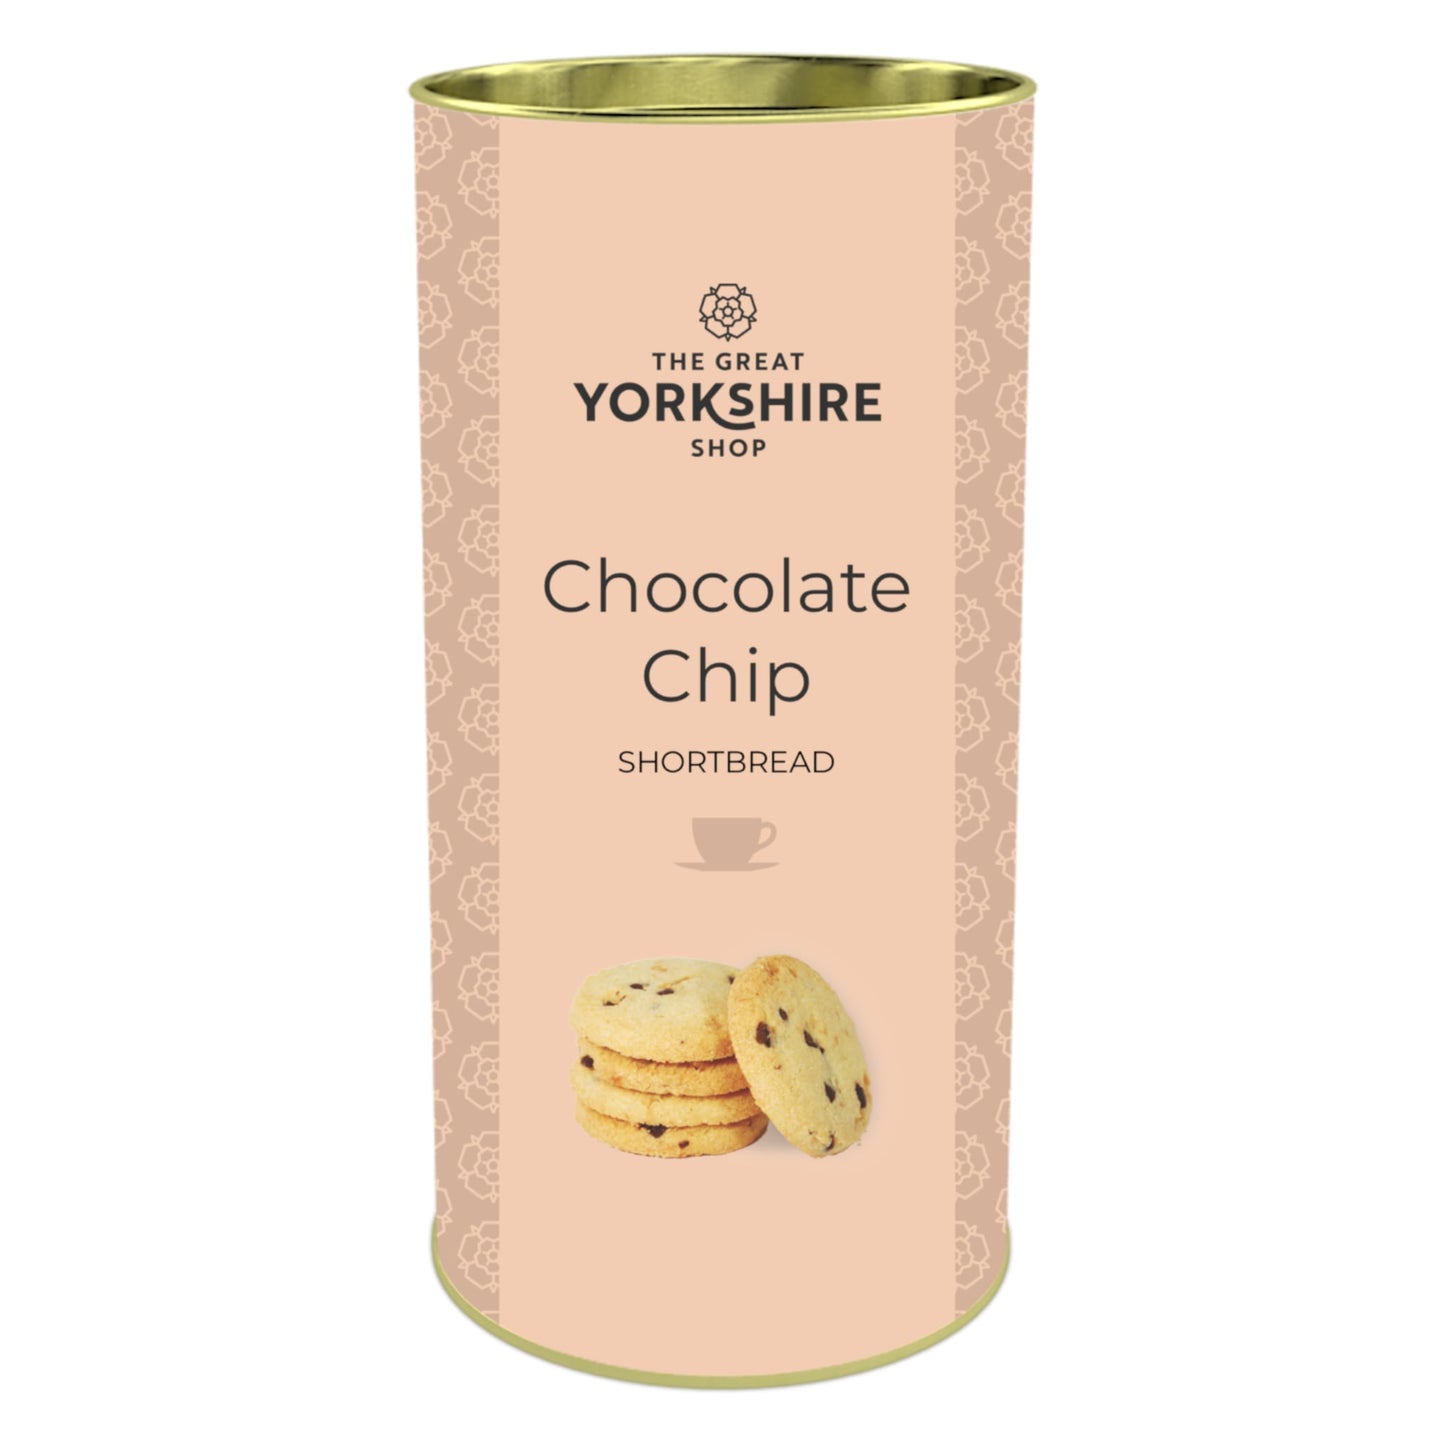 Chocolate Chip Shortbread Biscuits - The Great Yorkshire Shop